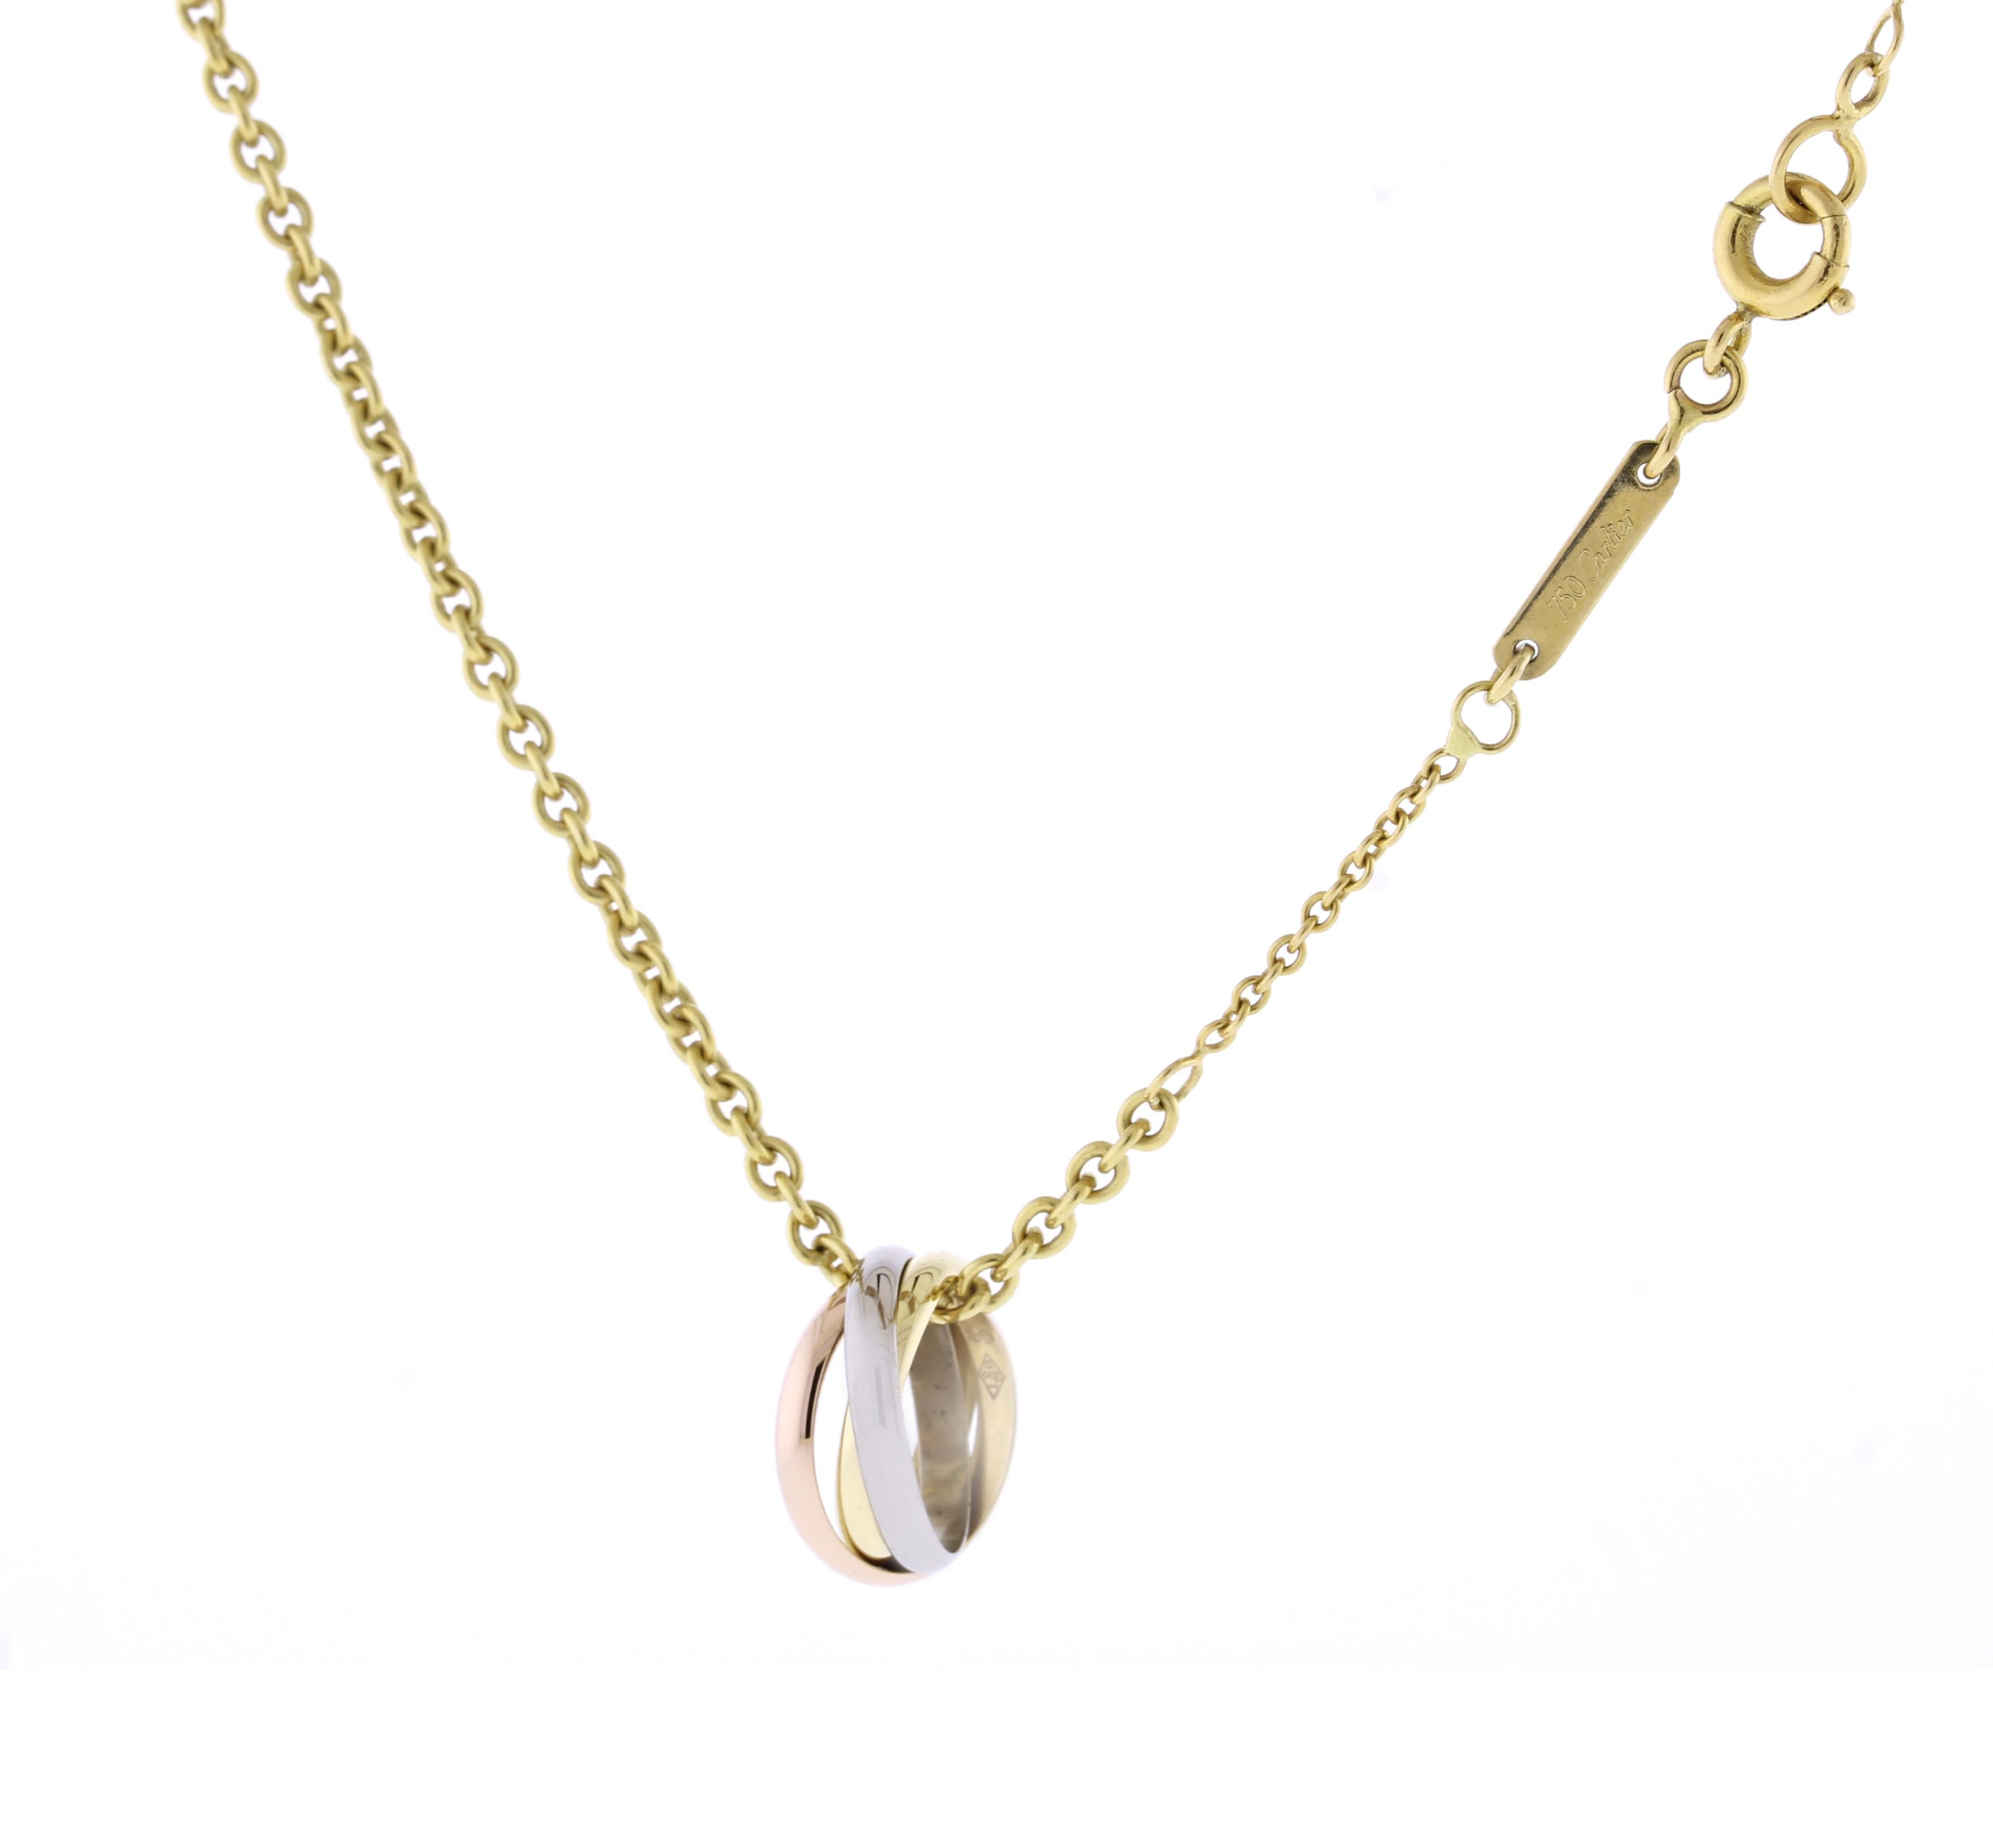 gold spoon necklace meaning